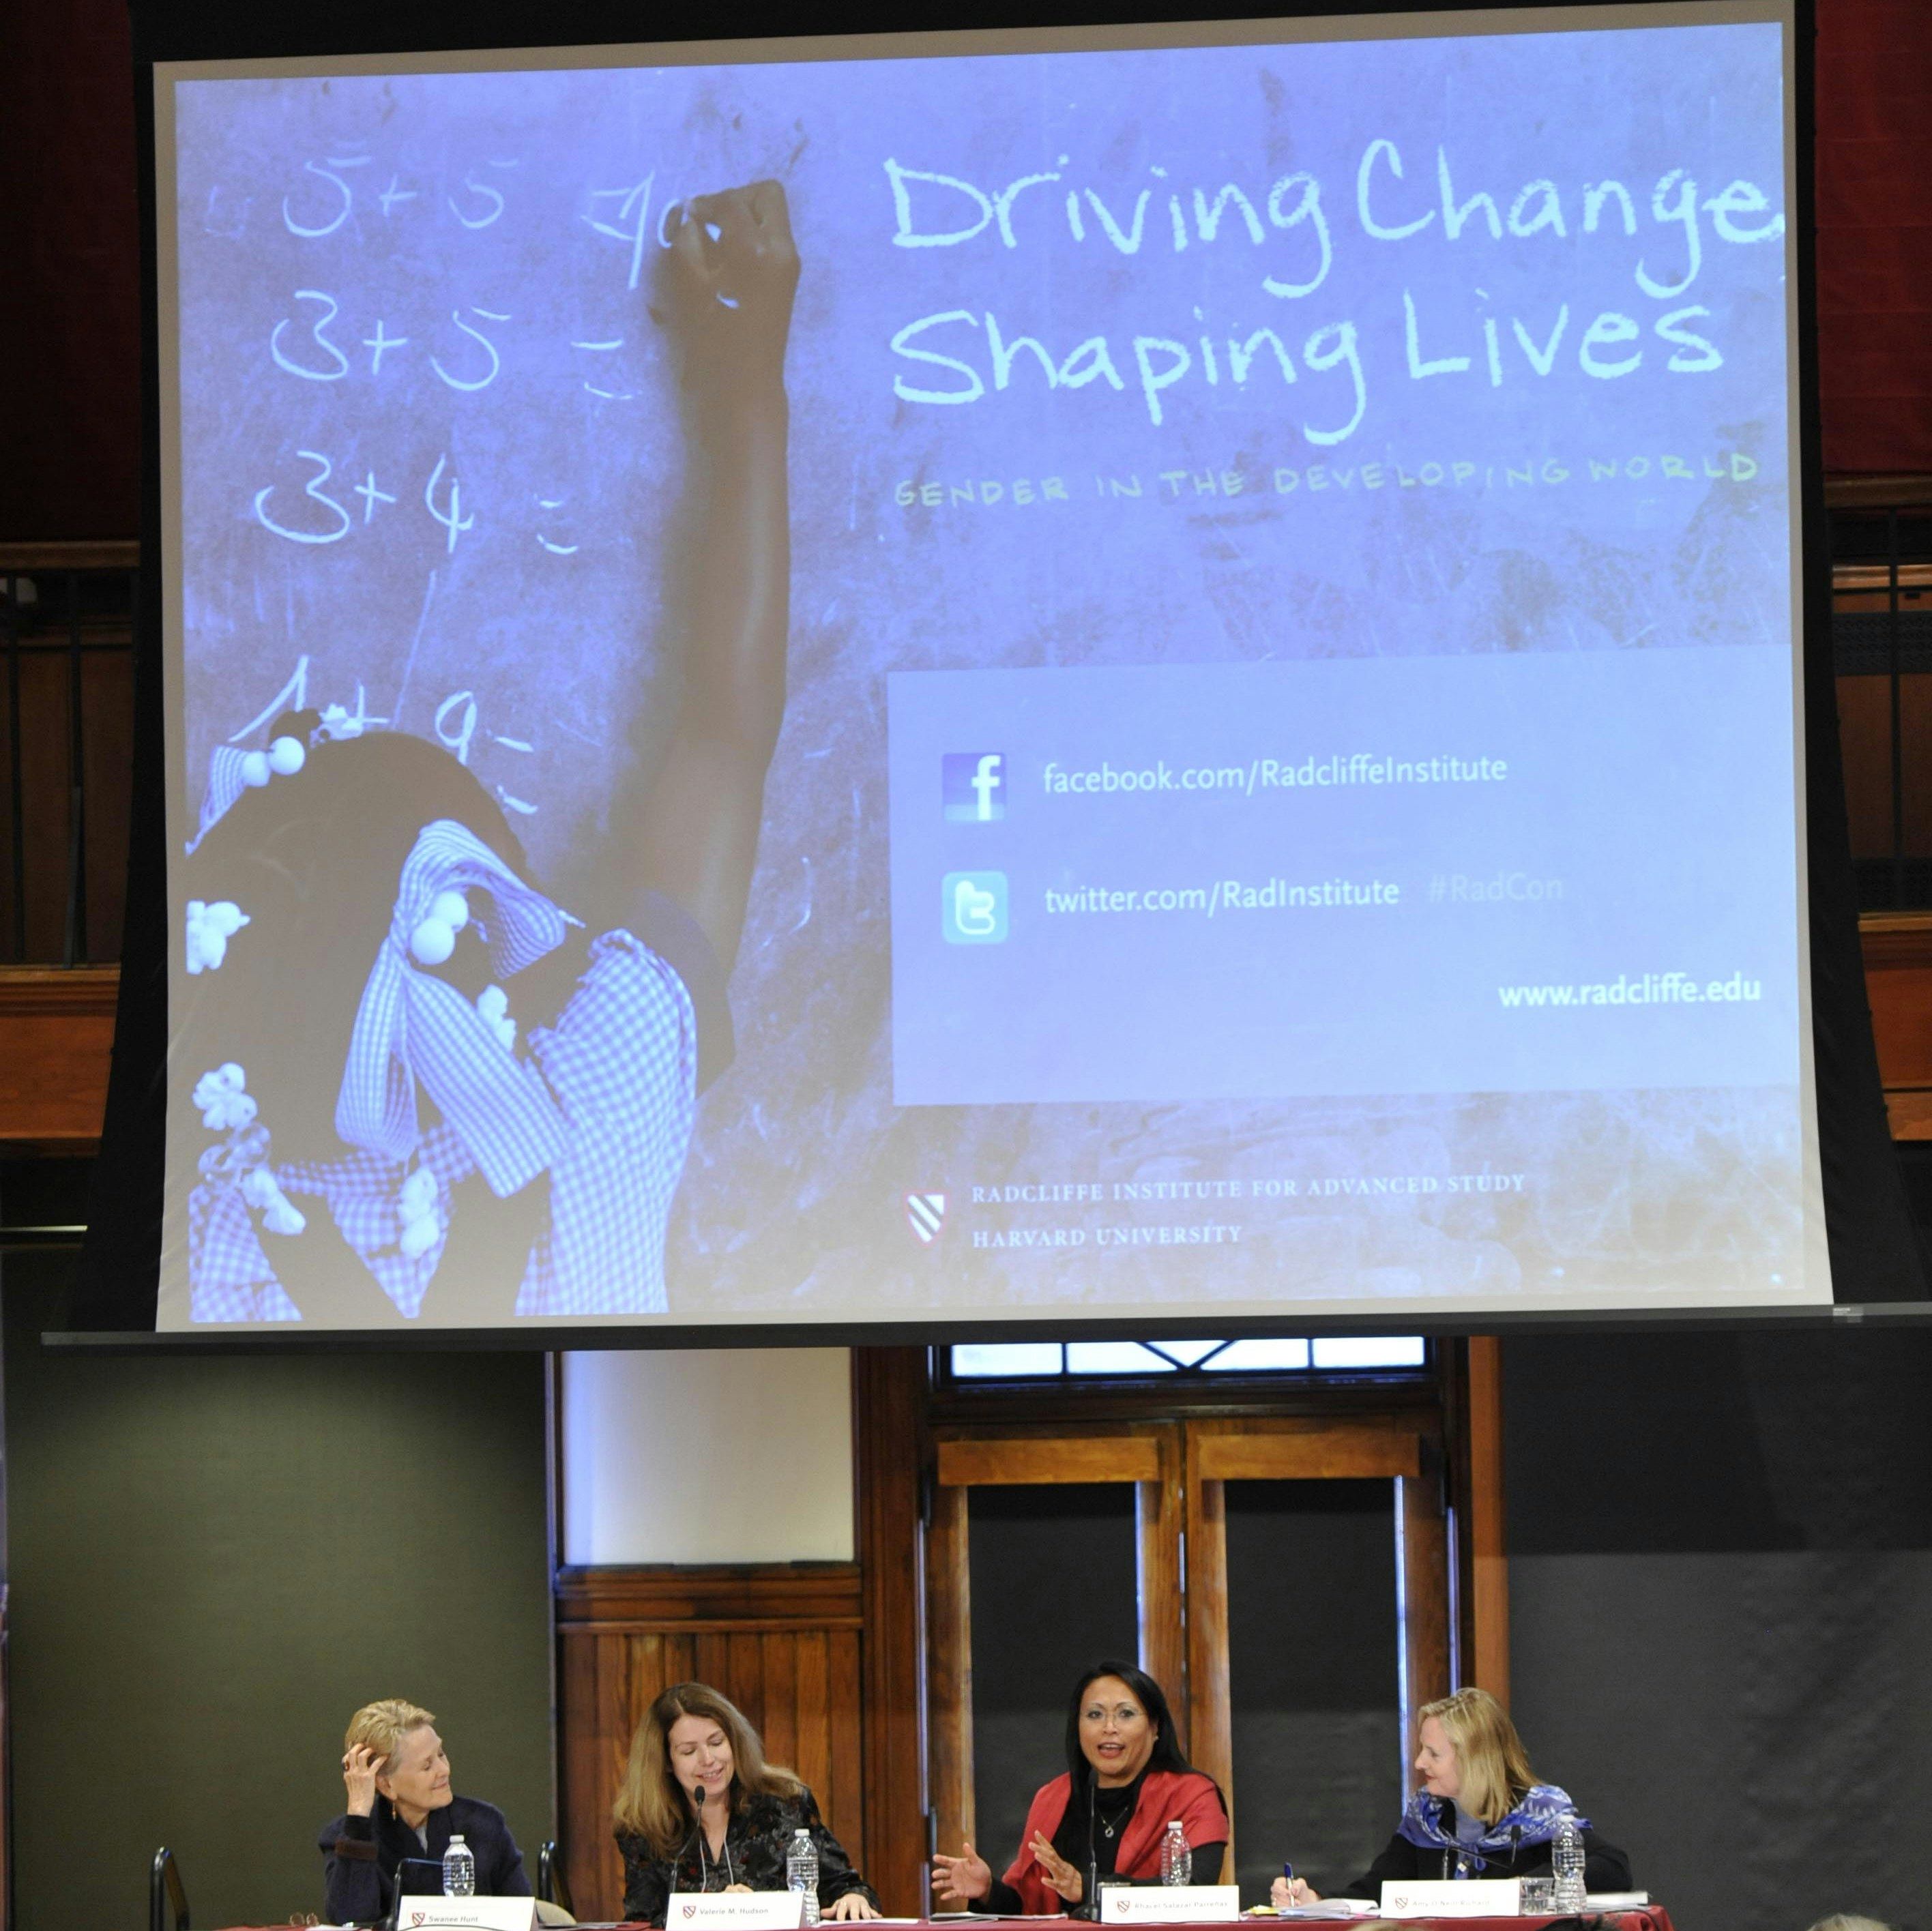 Panel at "Driving Change, Shaping Lives" conference